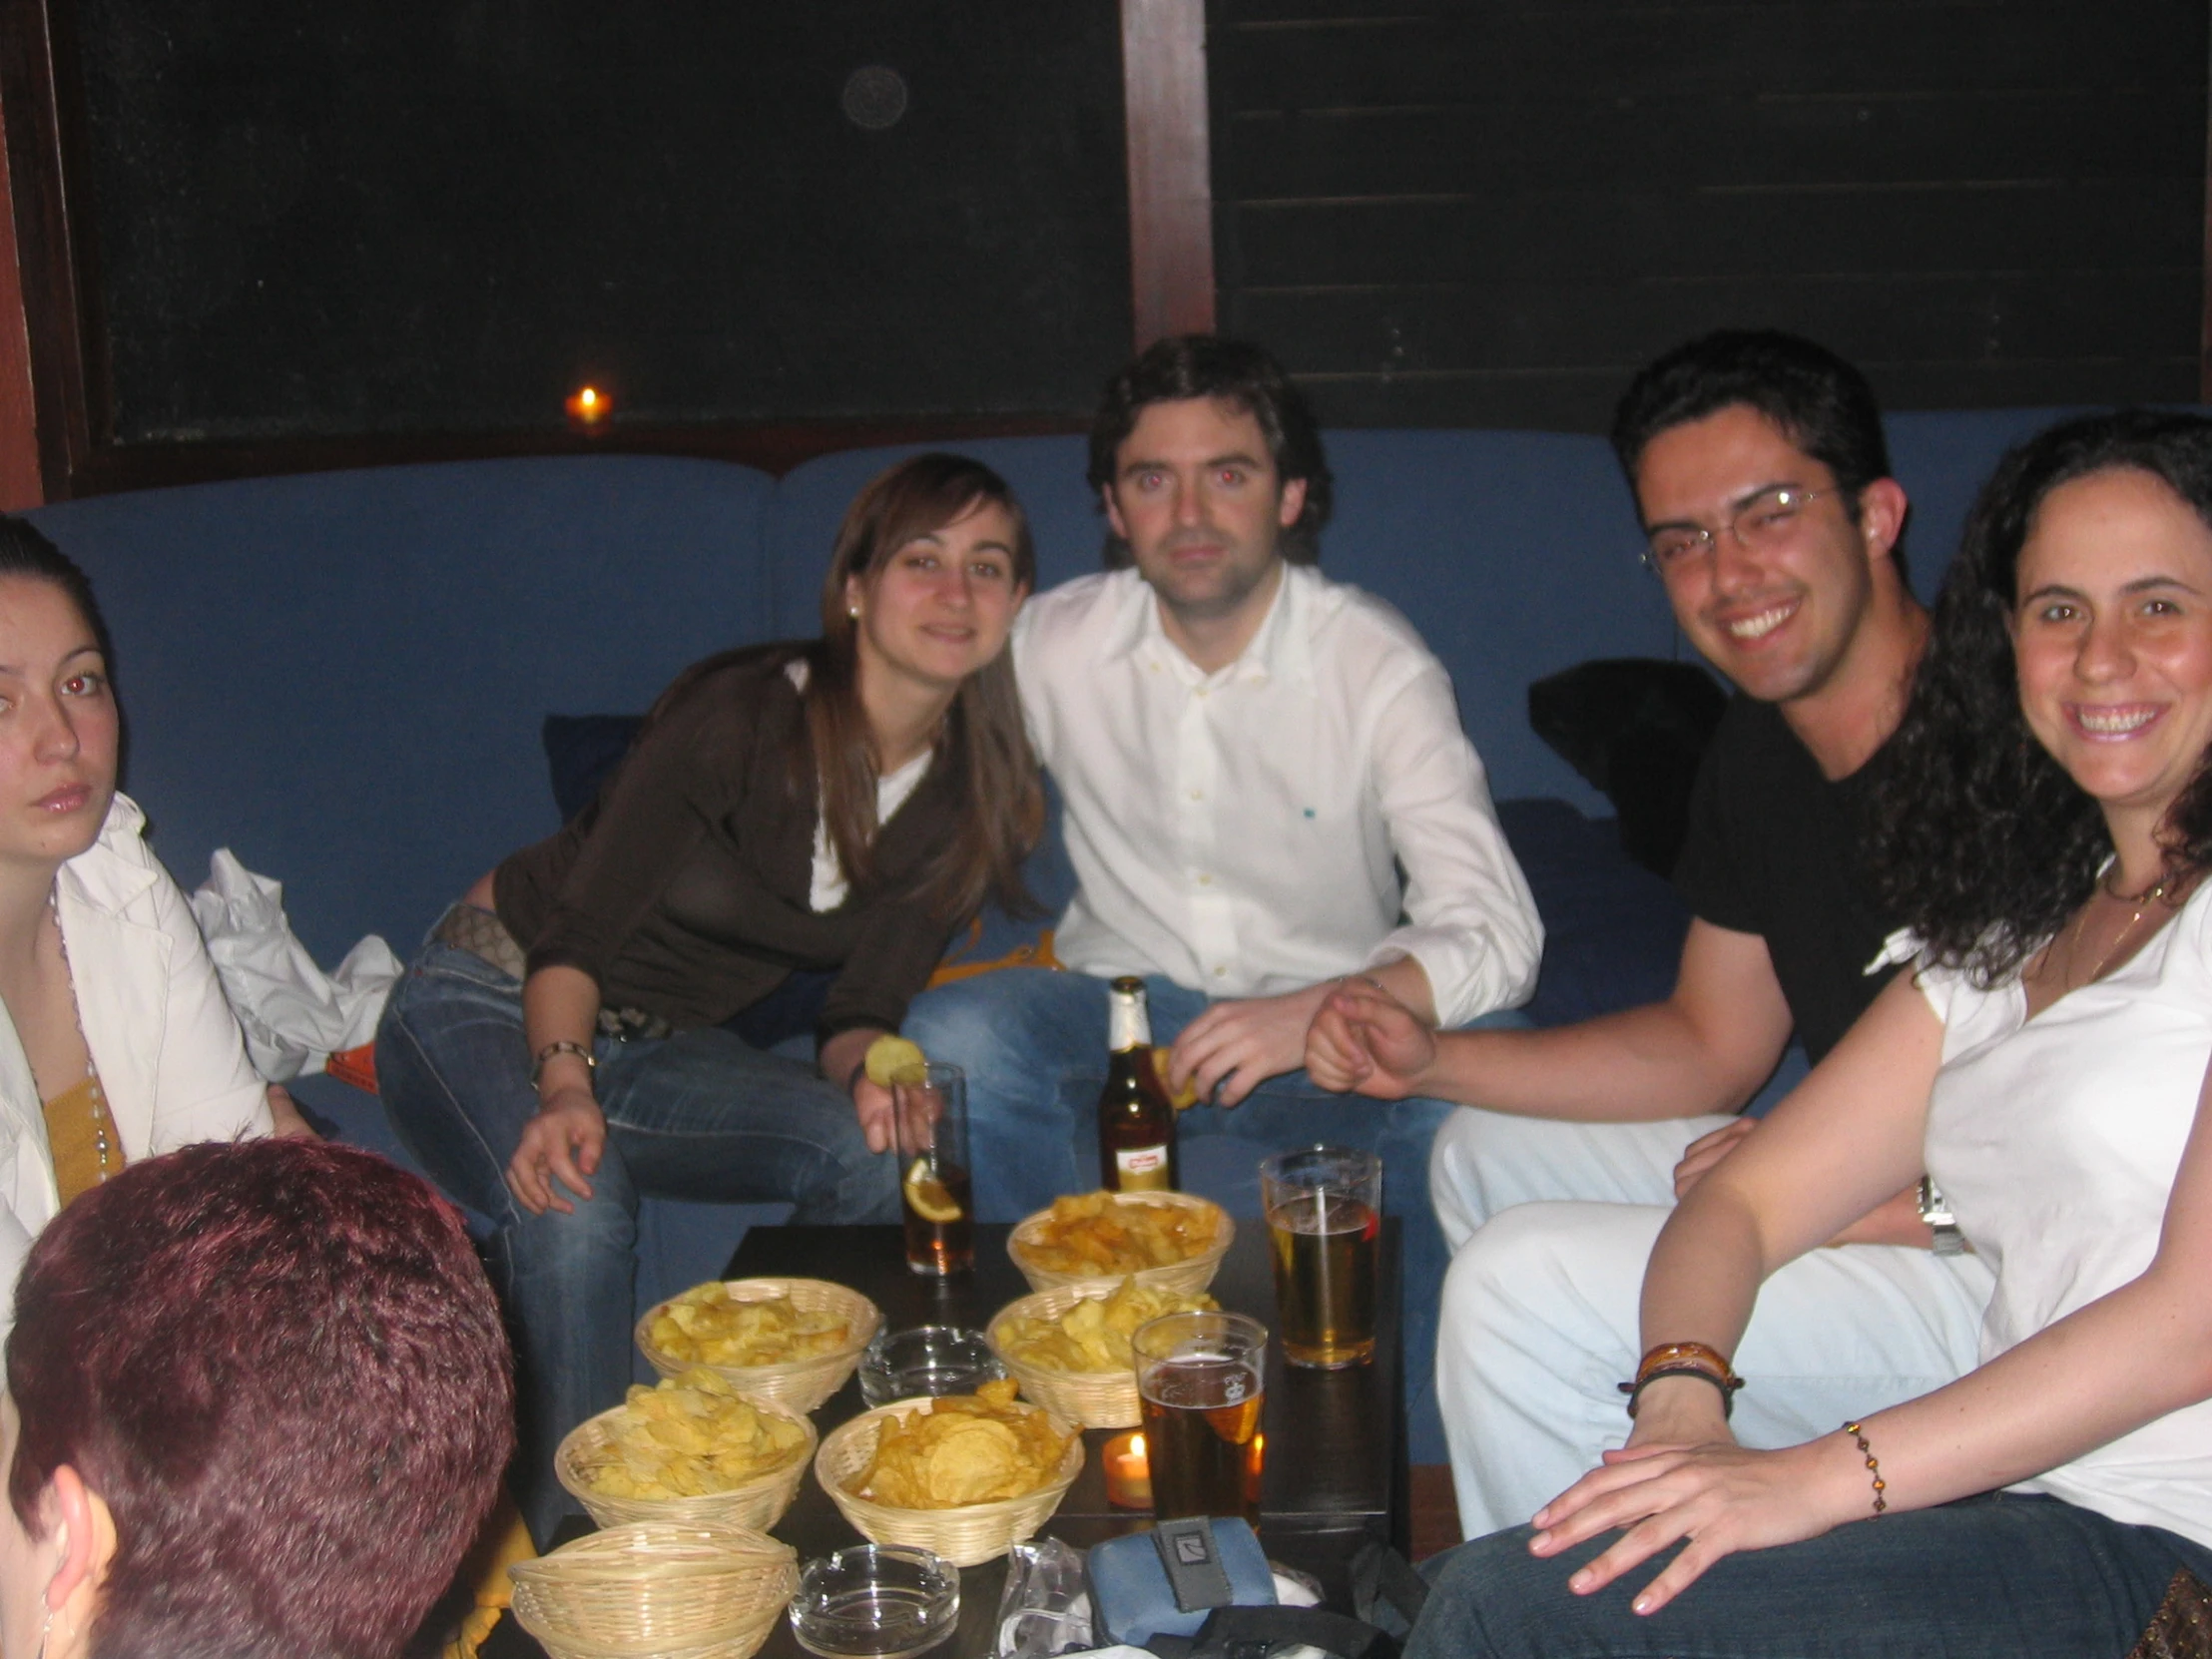 several people sitting at a table with food and drinks